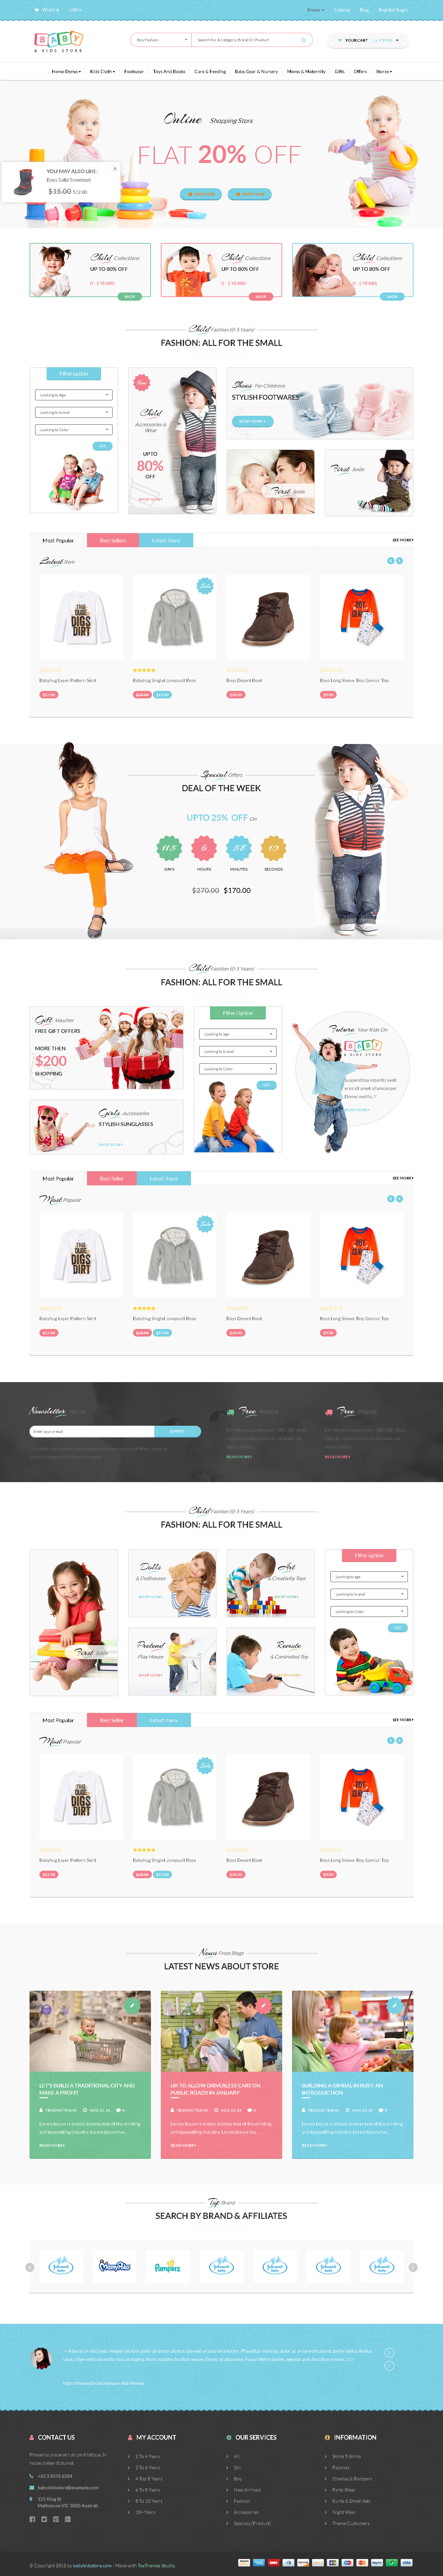 Best SHOPIFY Premium Themes Collection for Toy Stores 2017 -Baby Store - Clean, responsive Shopify themes